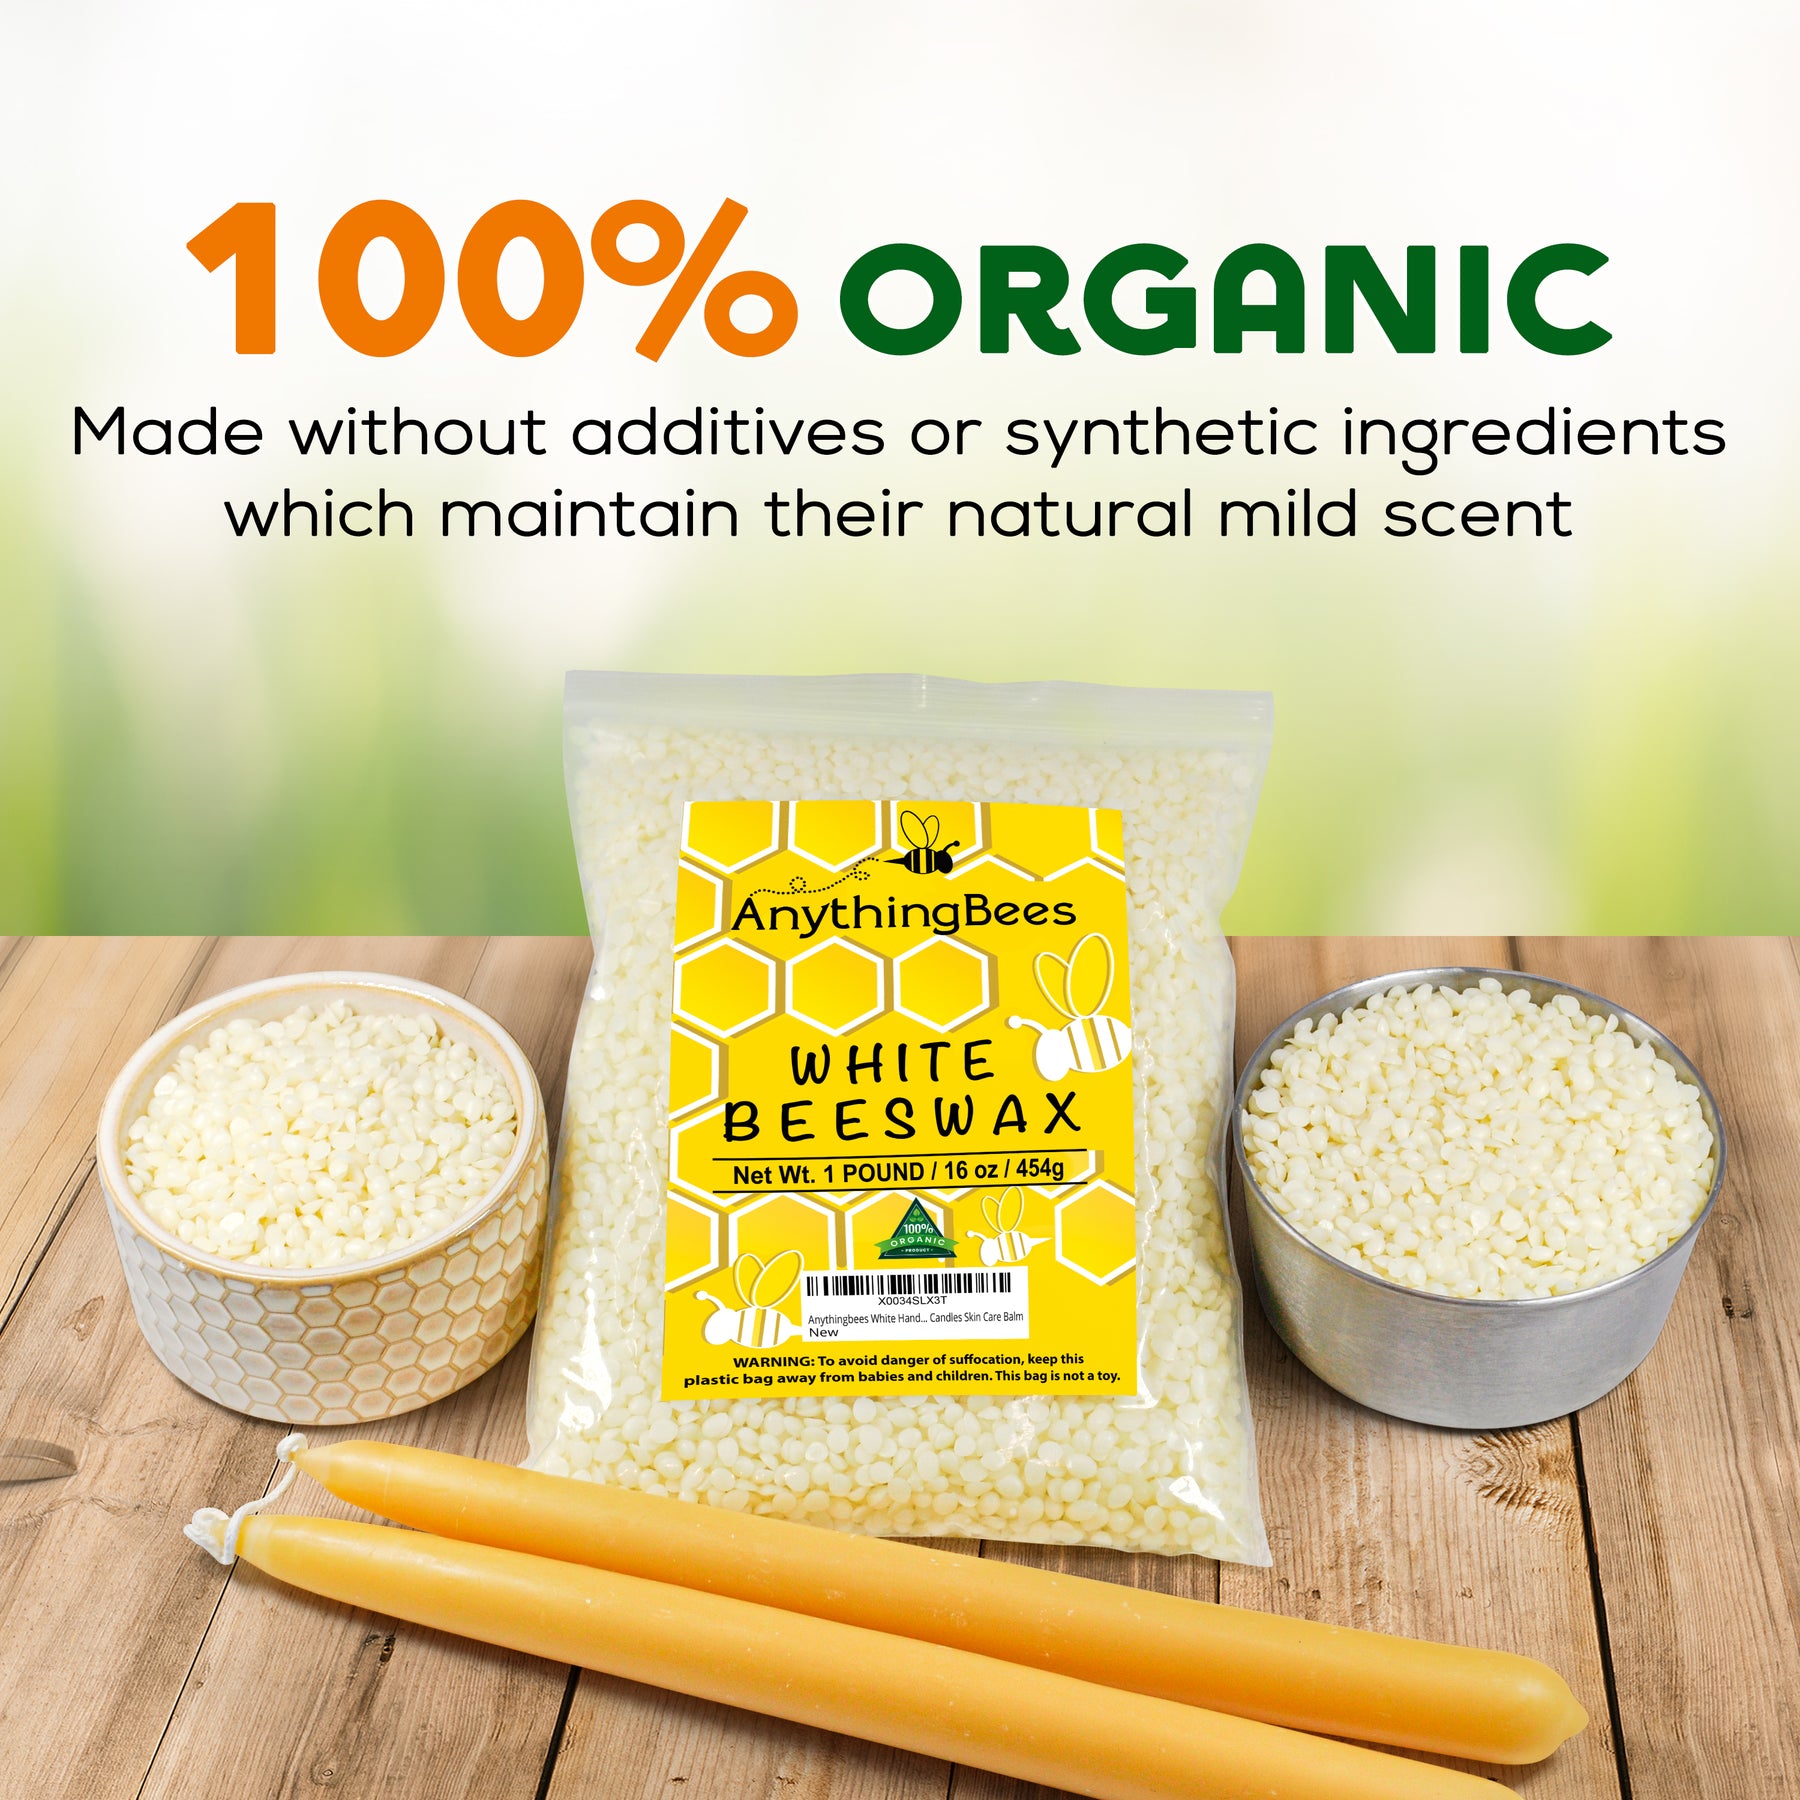 Inesscents - Organic Beeswax Pellets, 1 Oz.